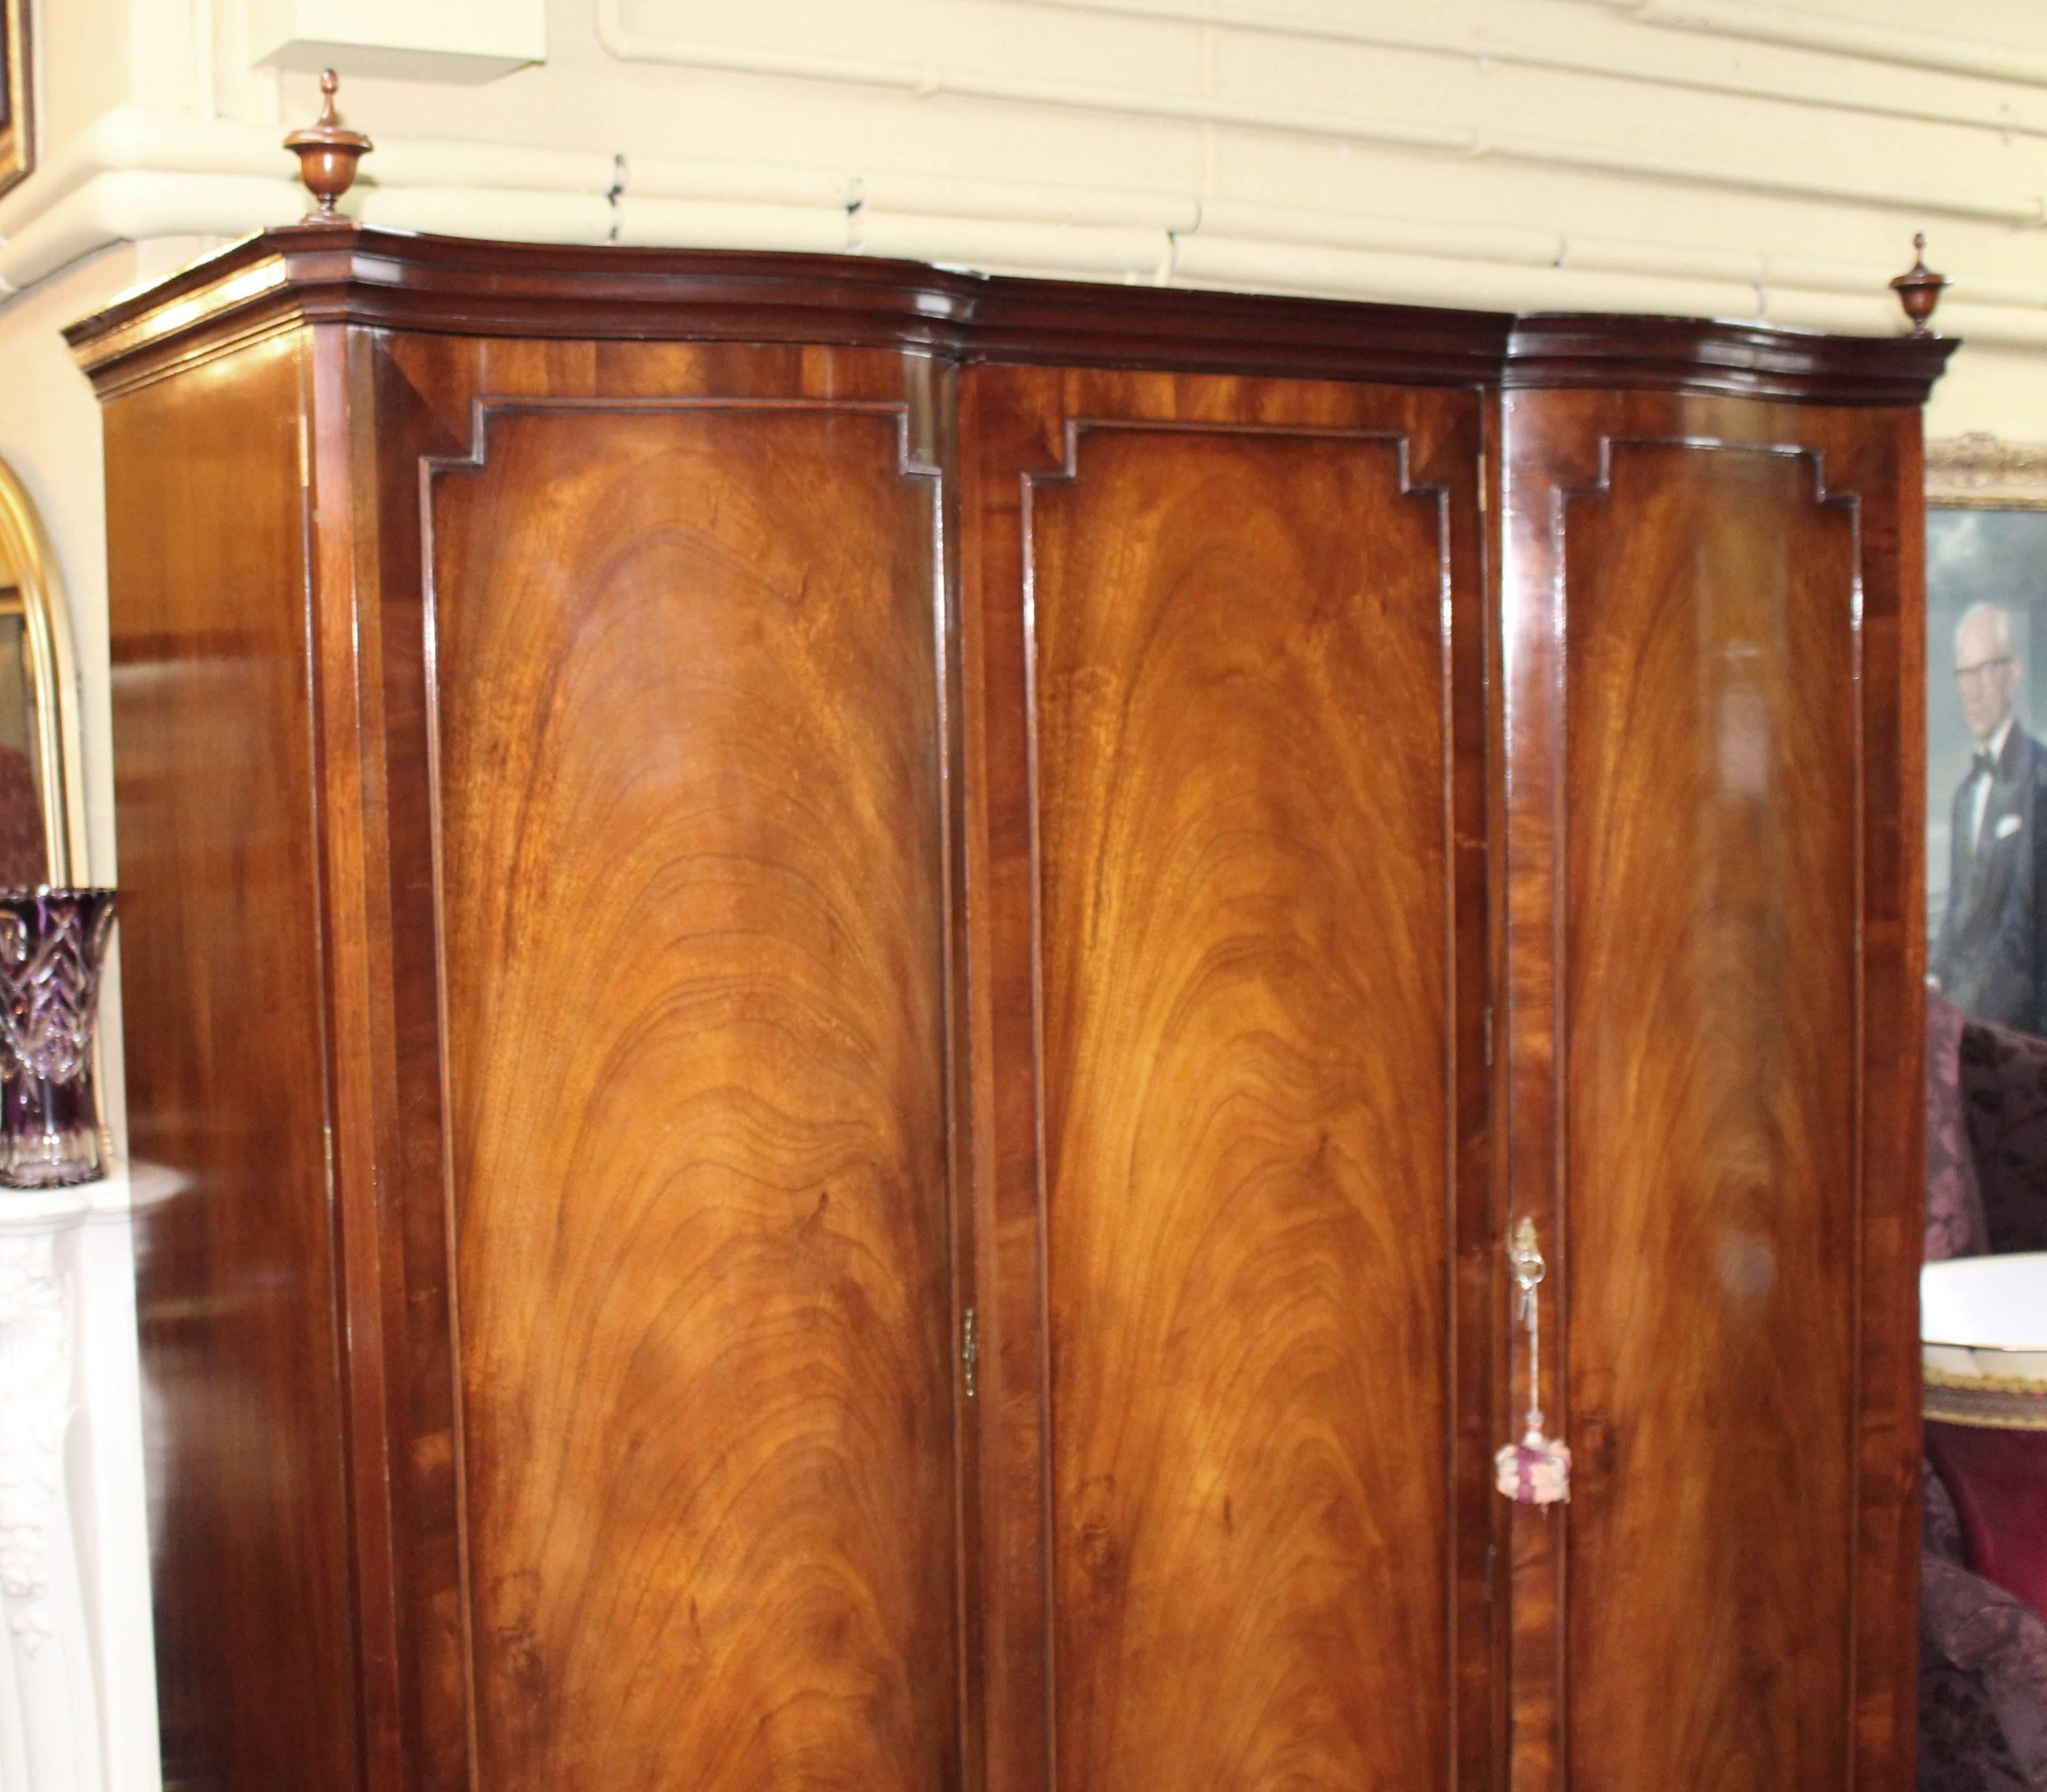 
Width	183 cm	6 ft
Depth	65 cm	25 1/2 in
Height	210 cm	6 ft 10 1/2 in



Period	Mid 20th c.
Wood	Flame mahogany
Condition	Good condition commensurate with age. One or two minor marks to finish, some age related wear. Keys present for